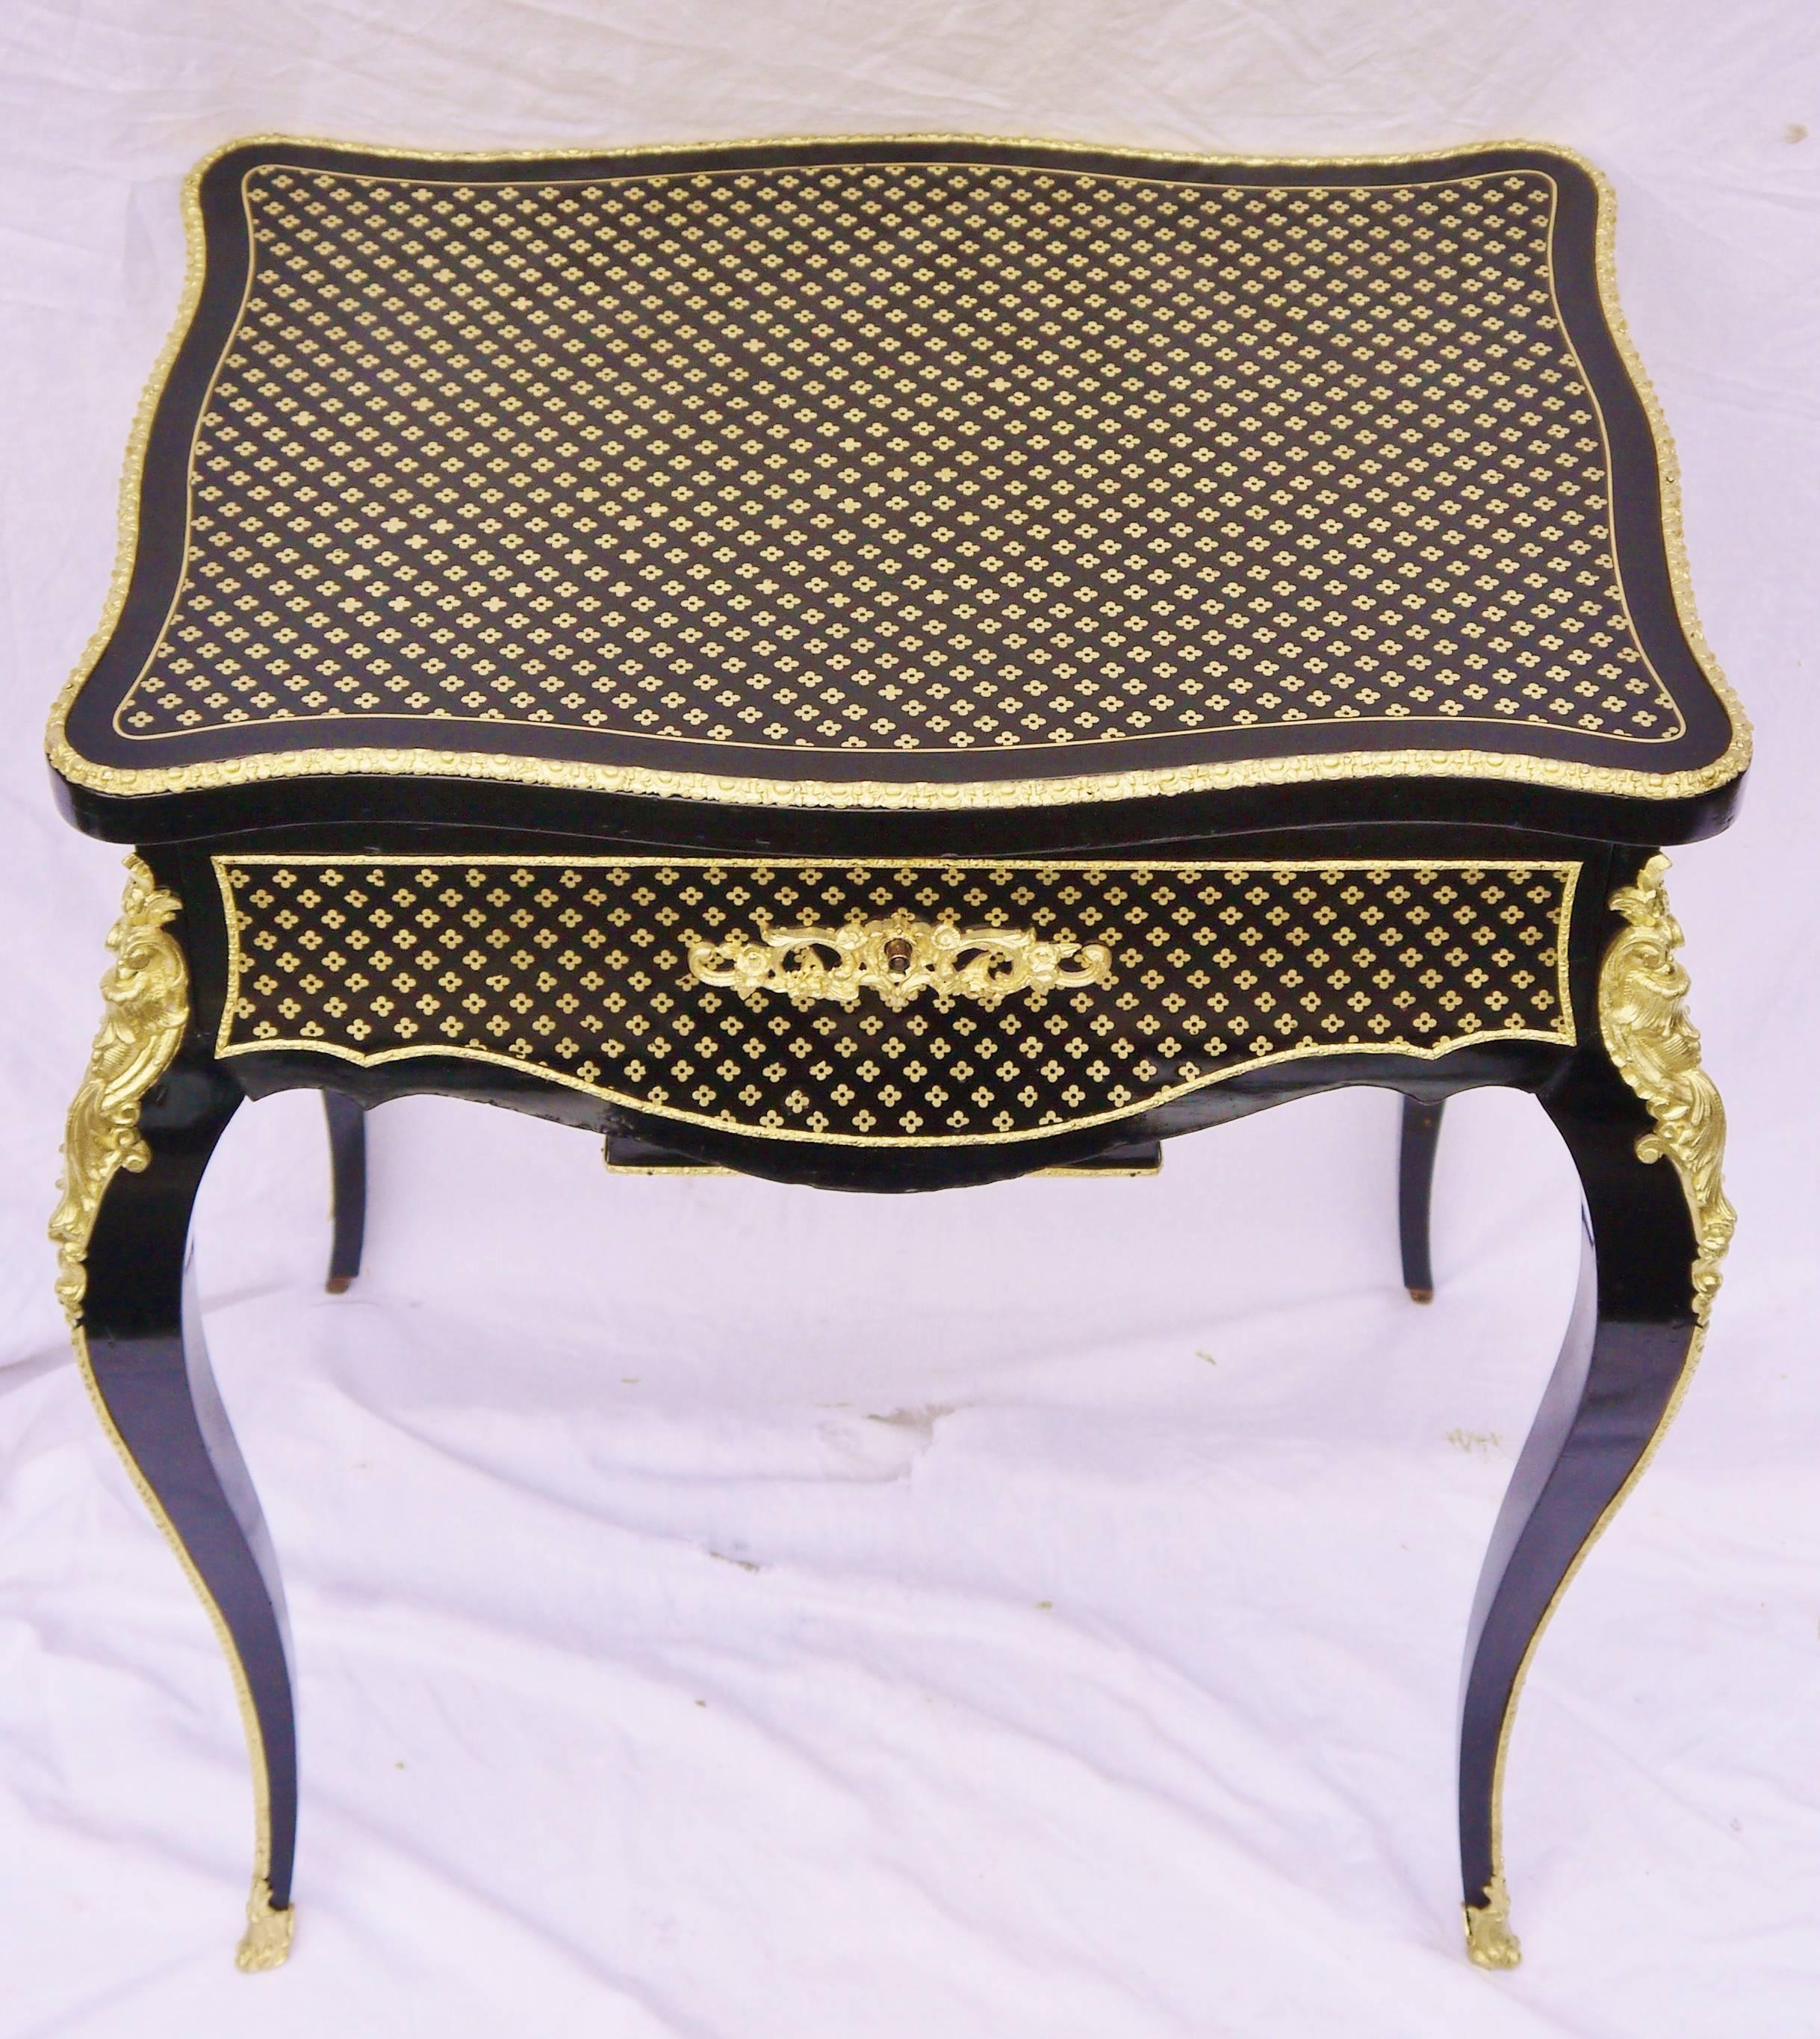 Napoleon III 19th Century, Louis XV Style, Ebony Boule Marquetry Travailleuse Side Table